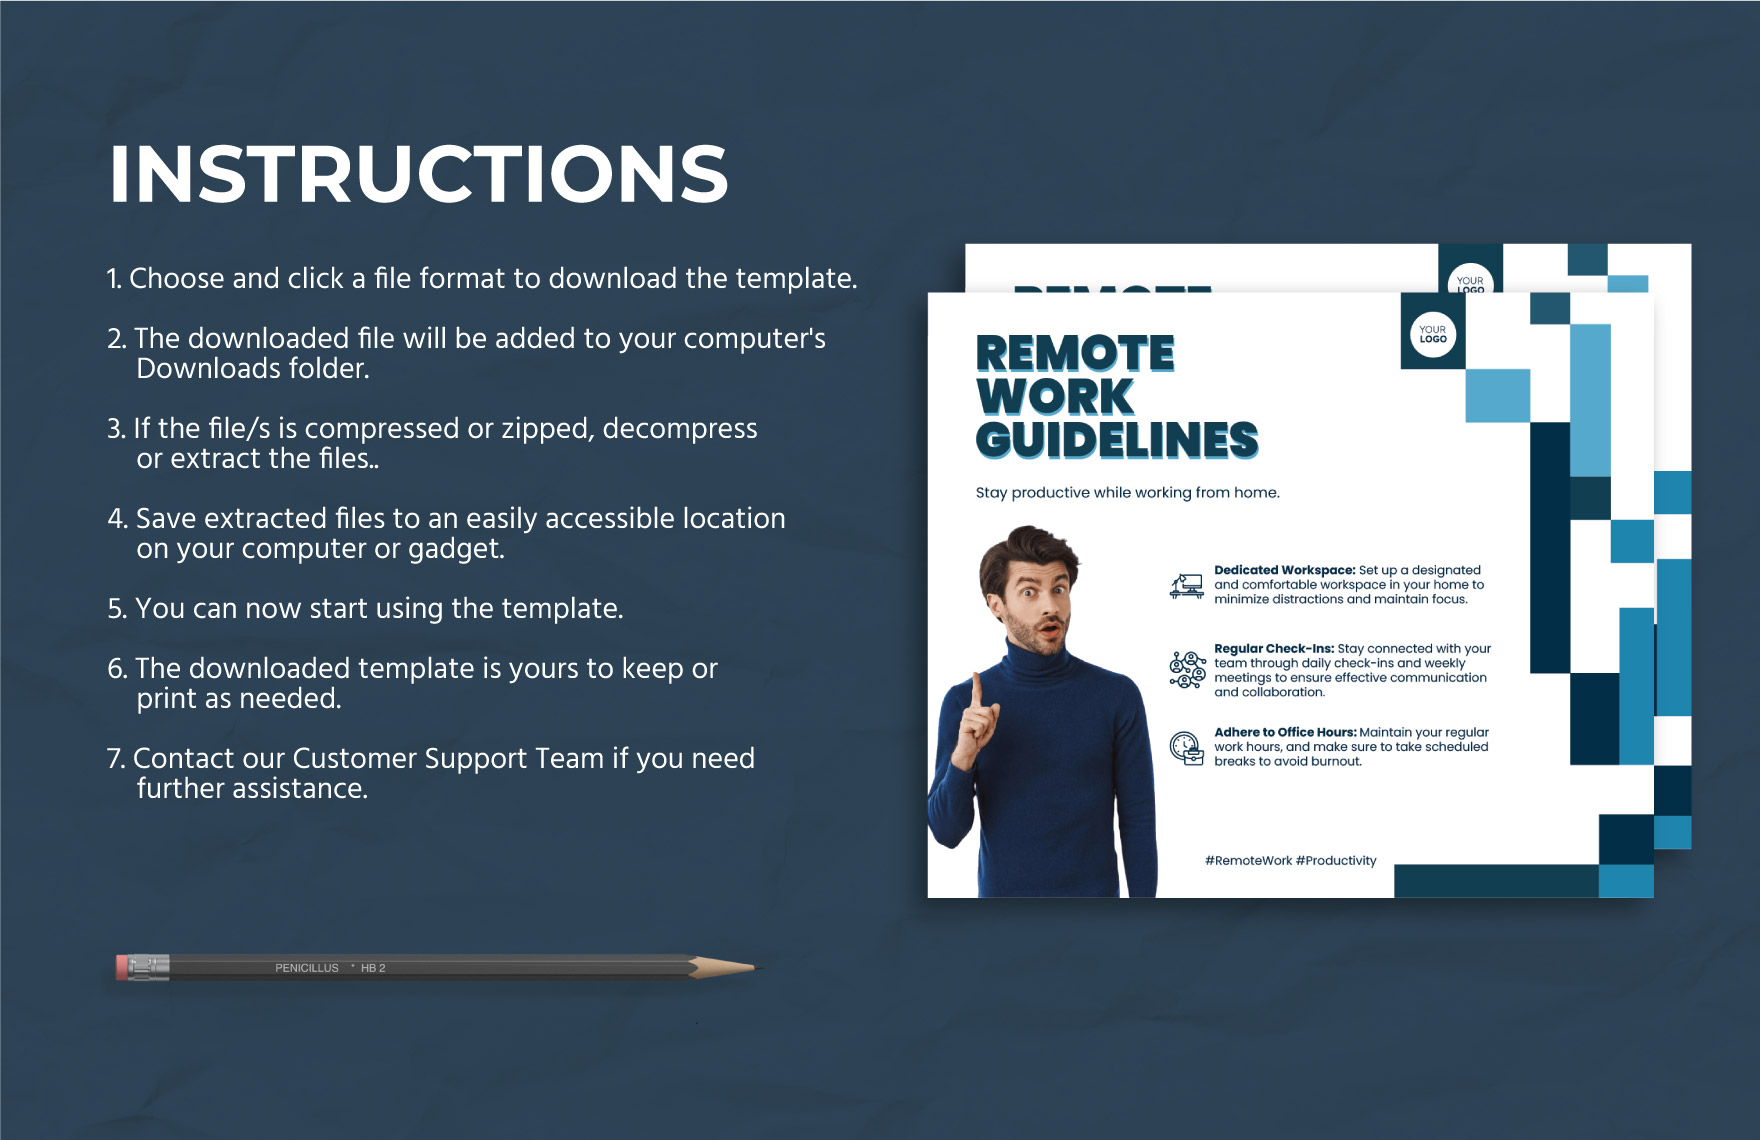 Work From Home Guidelines Banner HR Template